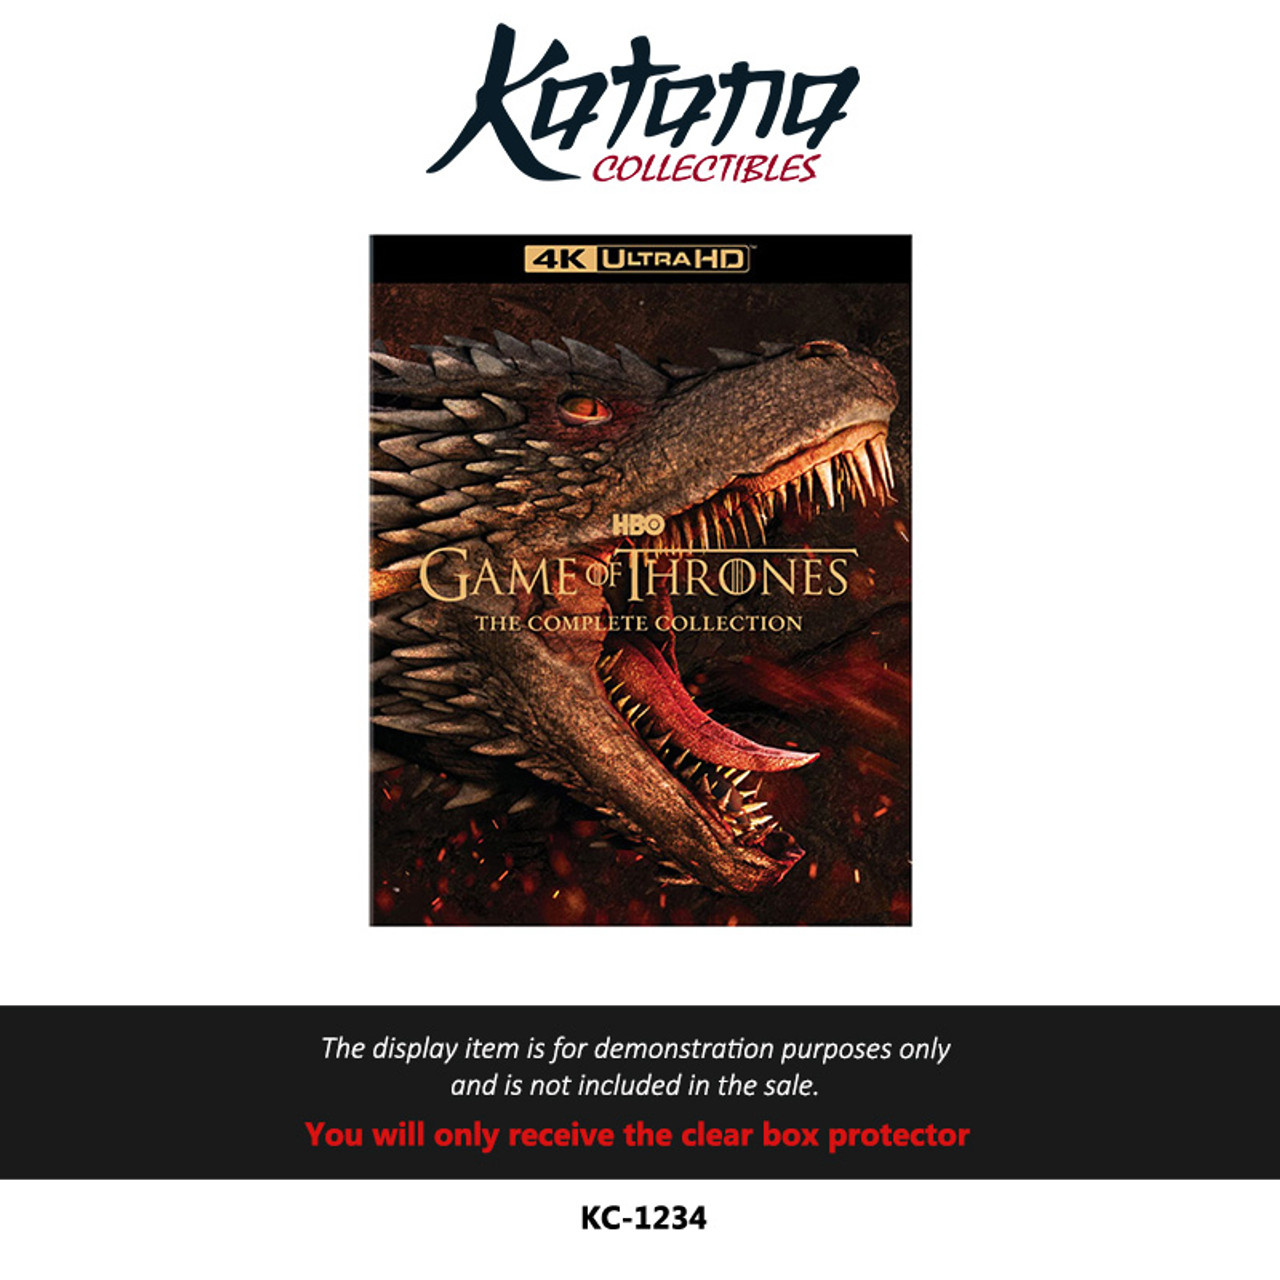 Katana Collectibles Protector For Game Of Thrones 4K Box Set, Complete Collection